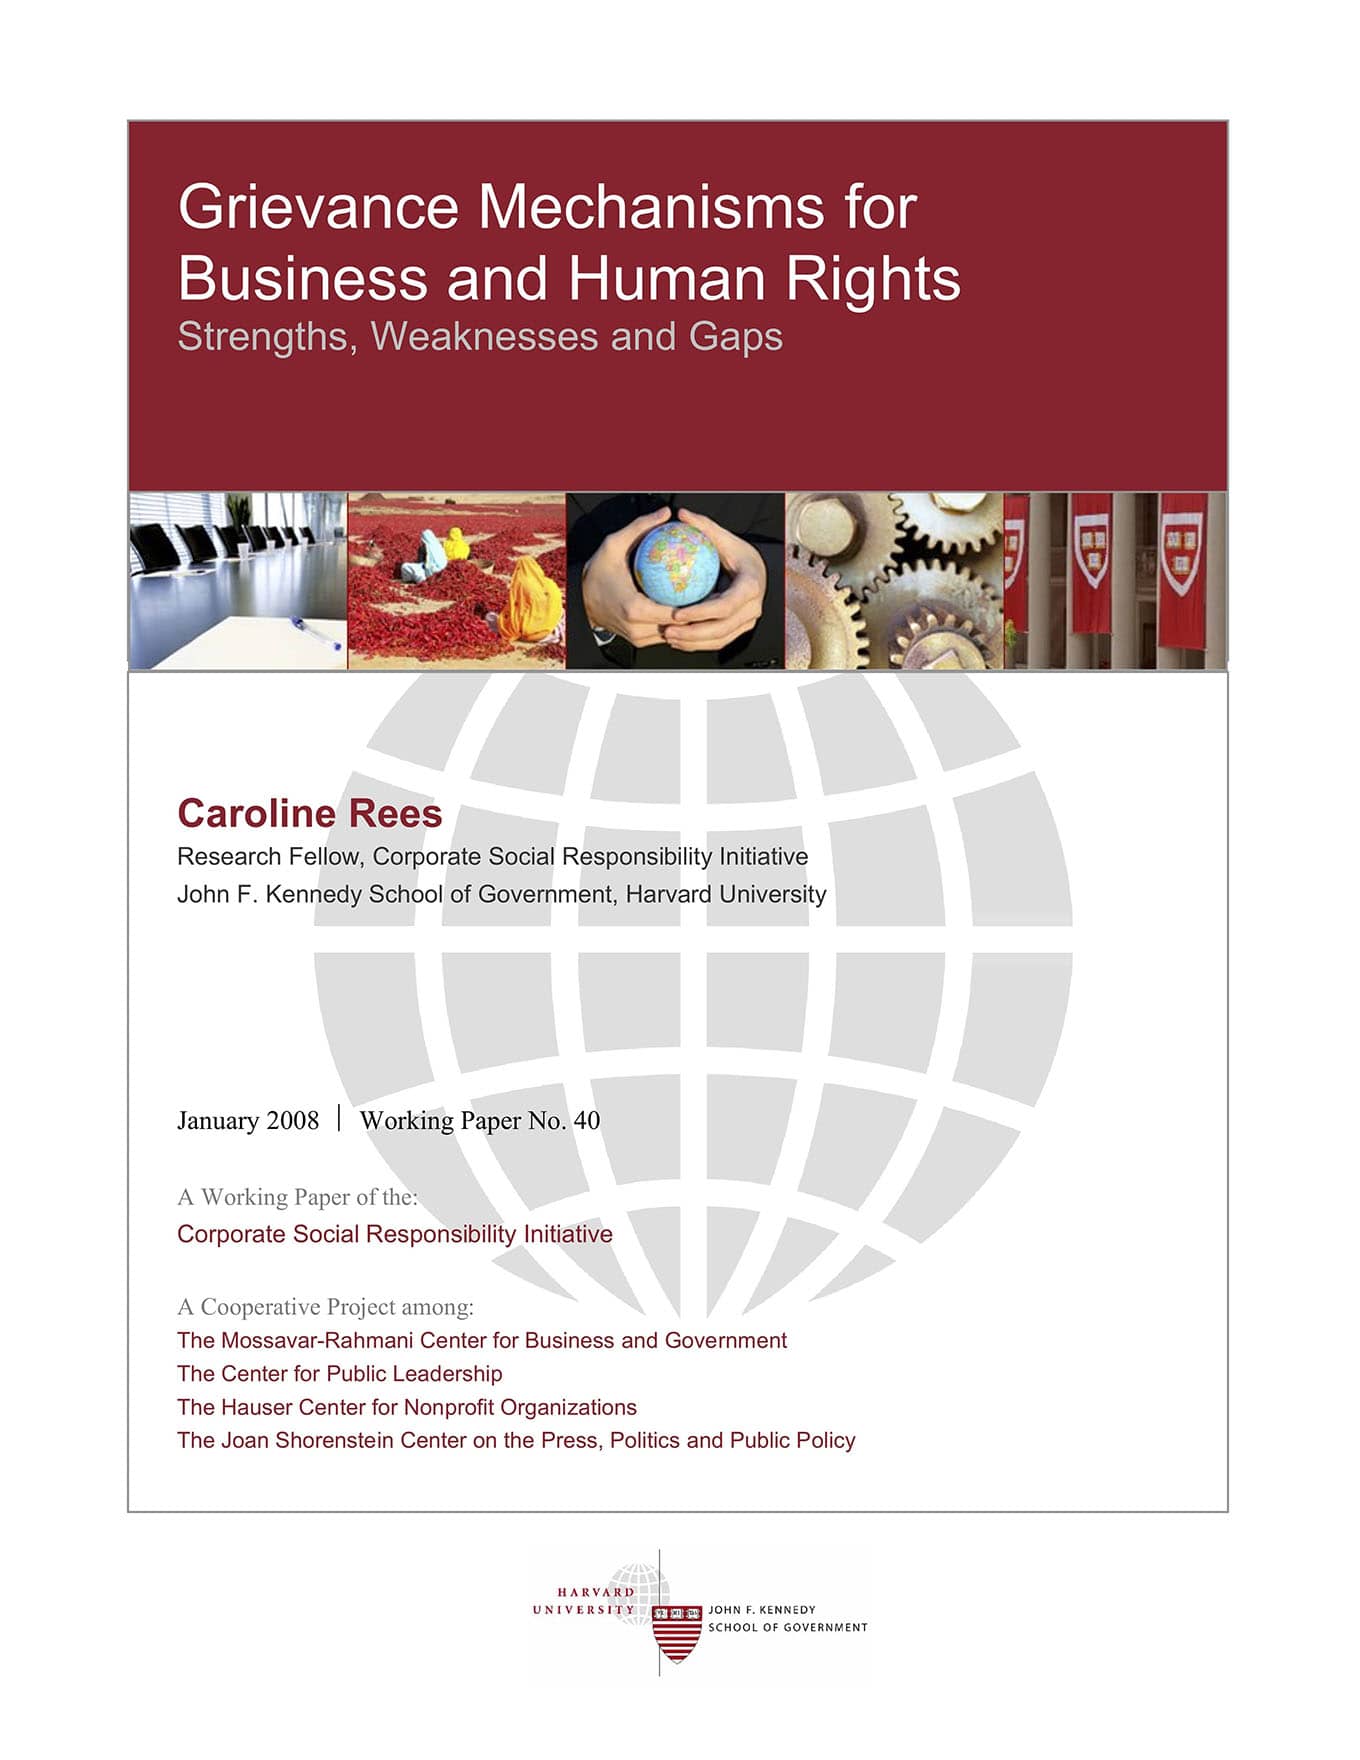 Mapping Grievance Mechanisms in the Business and Human Rights Arena (CSR Initiative, 2008)